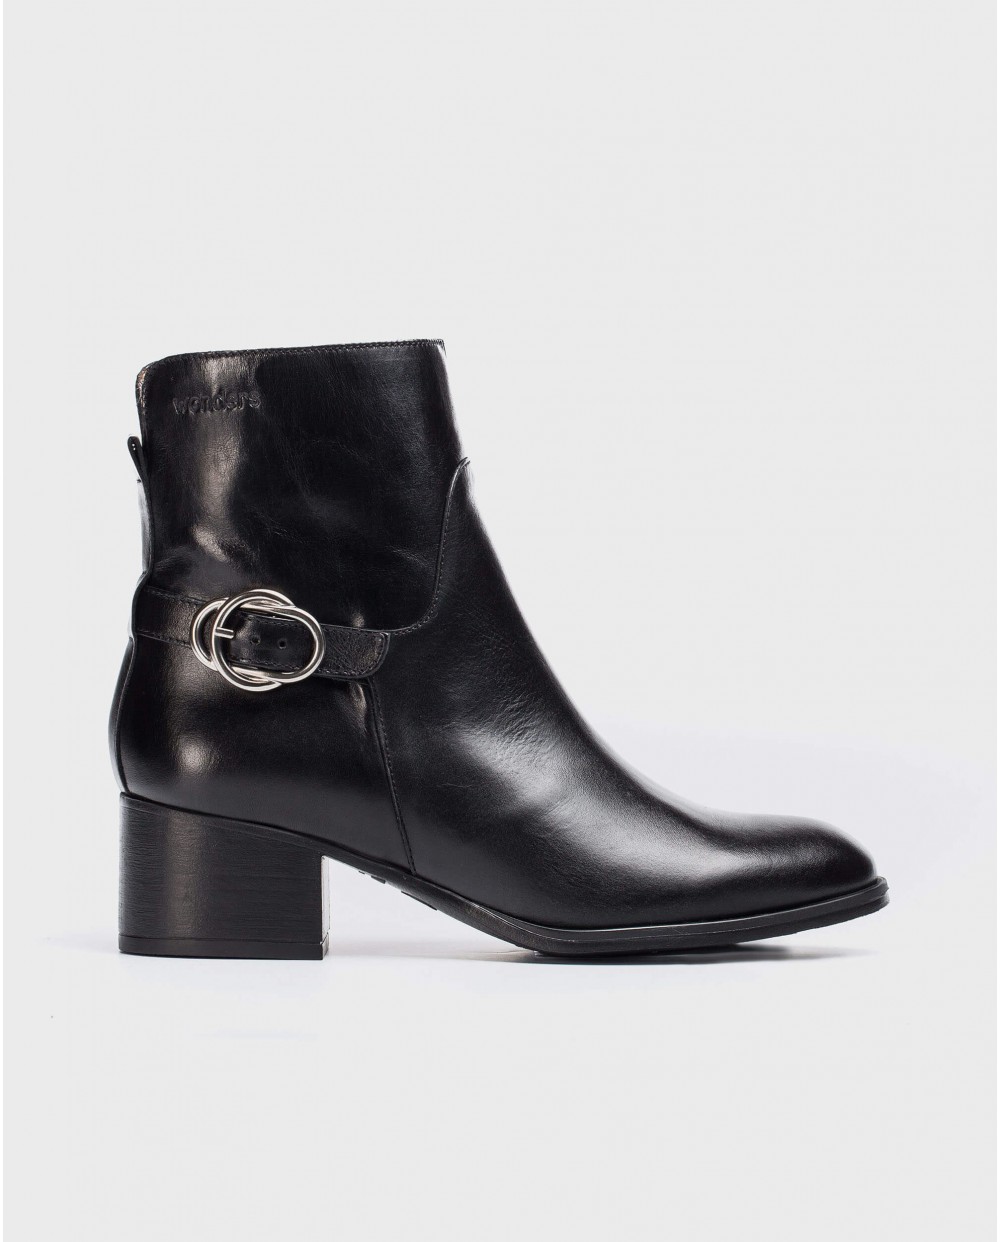 Wonders-Ankle Boots-Black Niza Ankle Boot